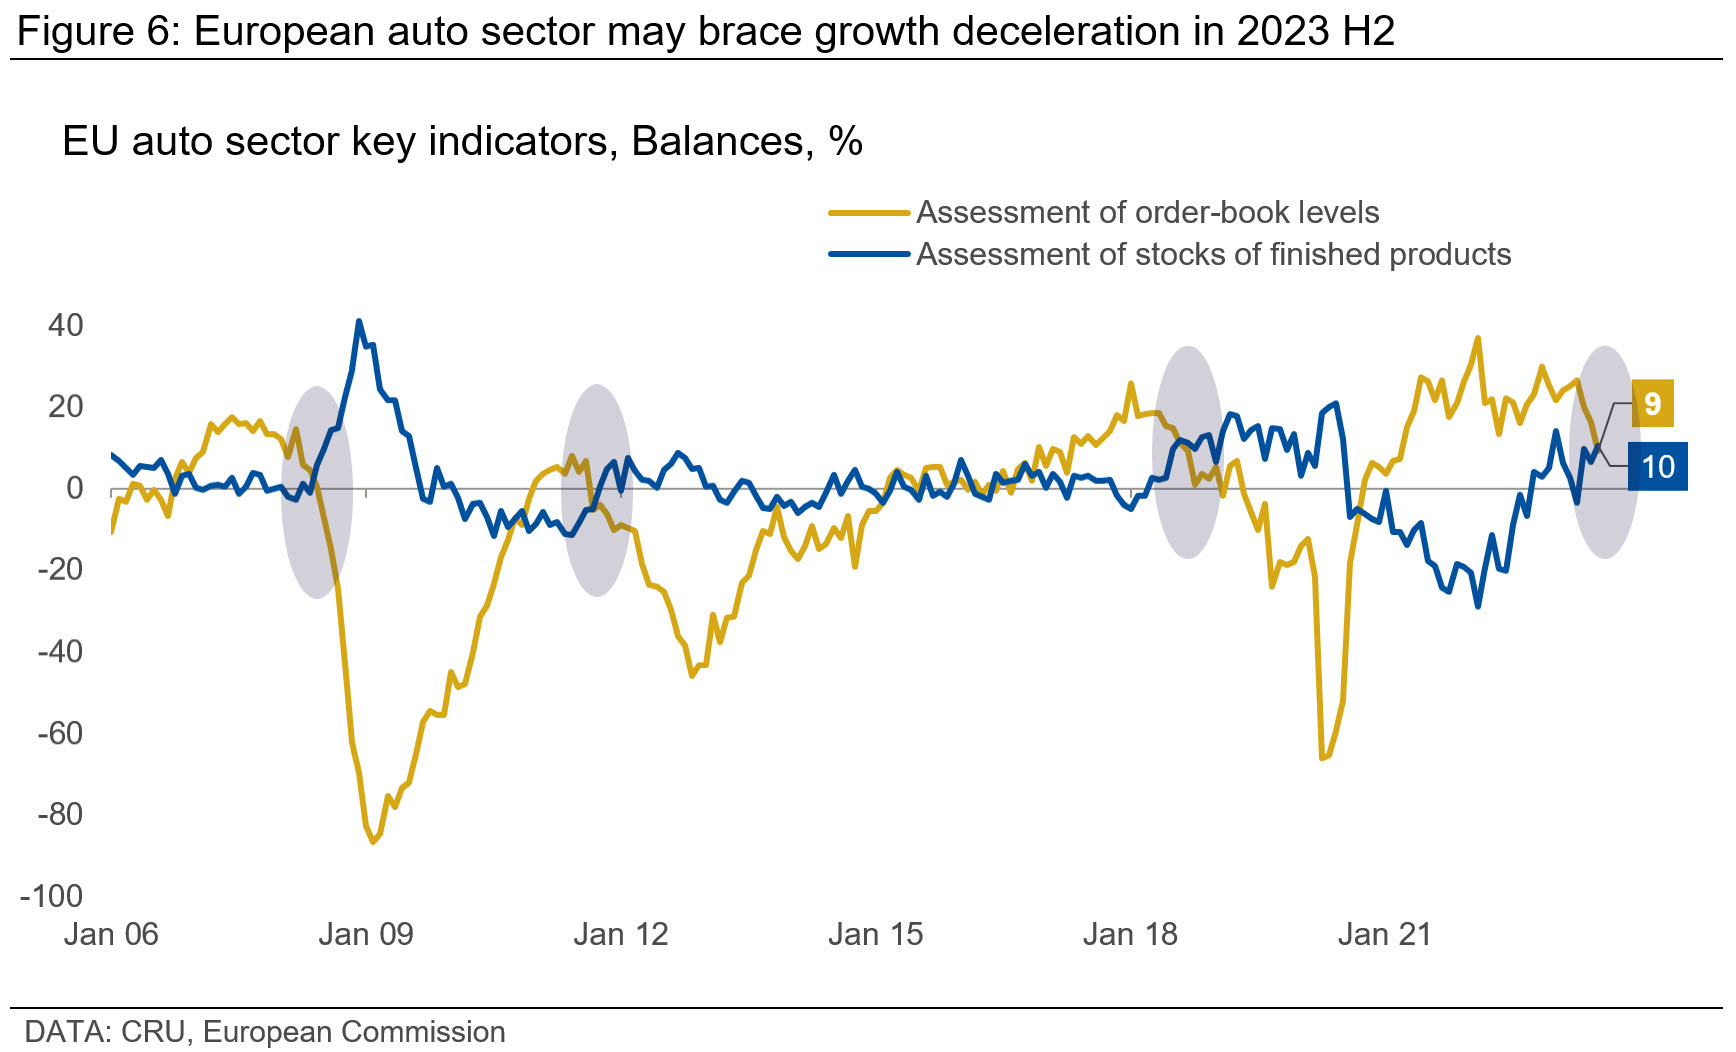 Graph showing that European auto sector may brace growth deceleration in 2023 H2